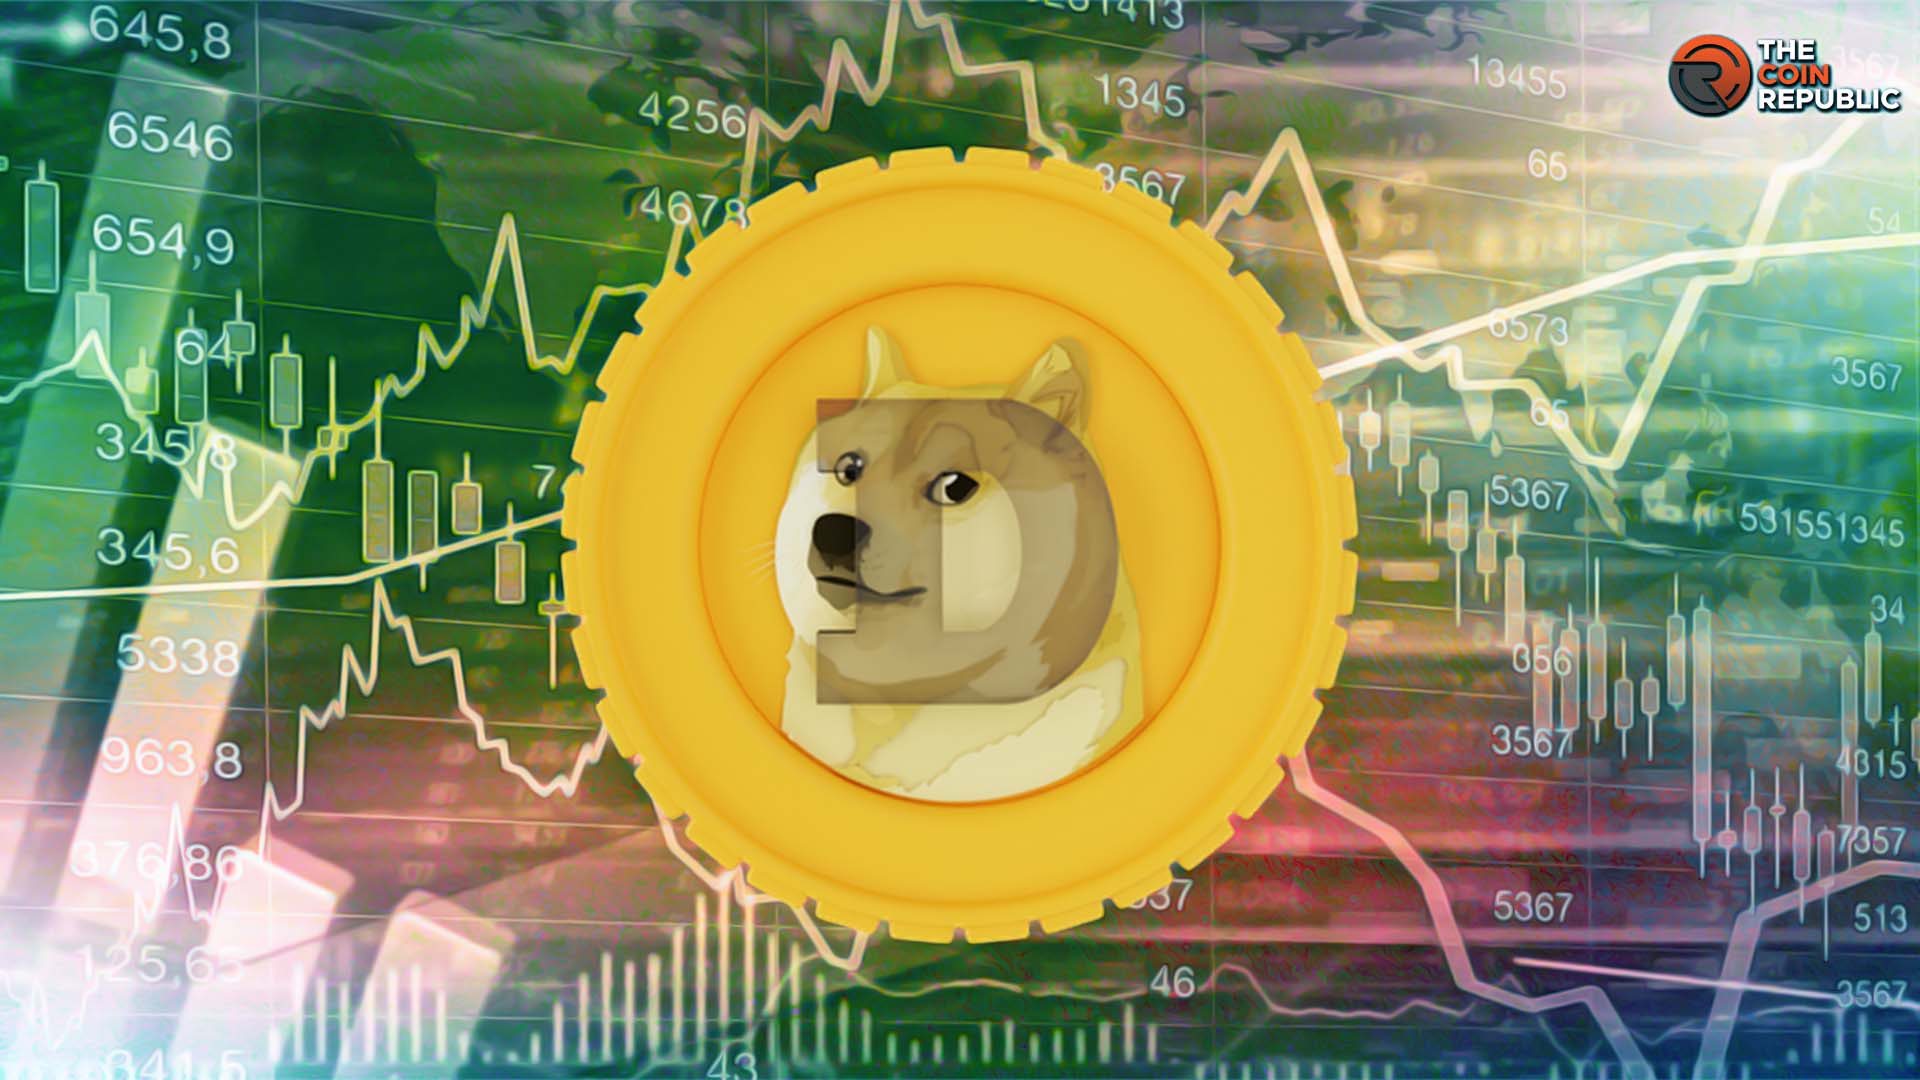 Dogecoin Price Prediction: Will DOGE Skip This Consolidation?